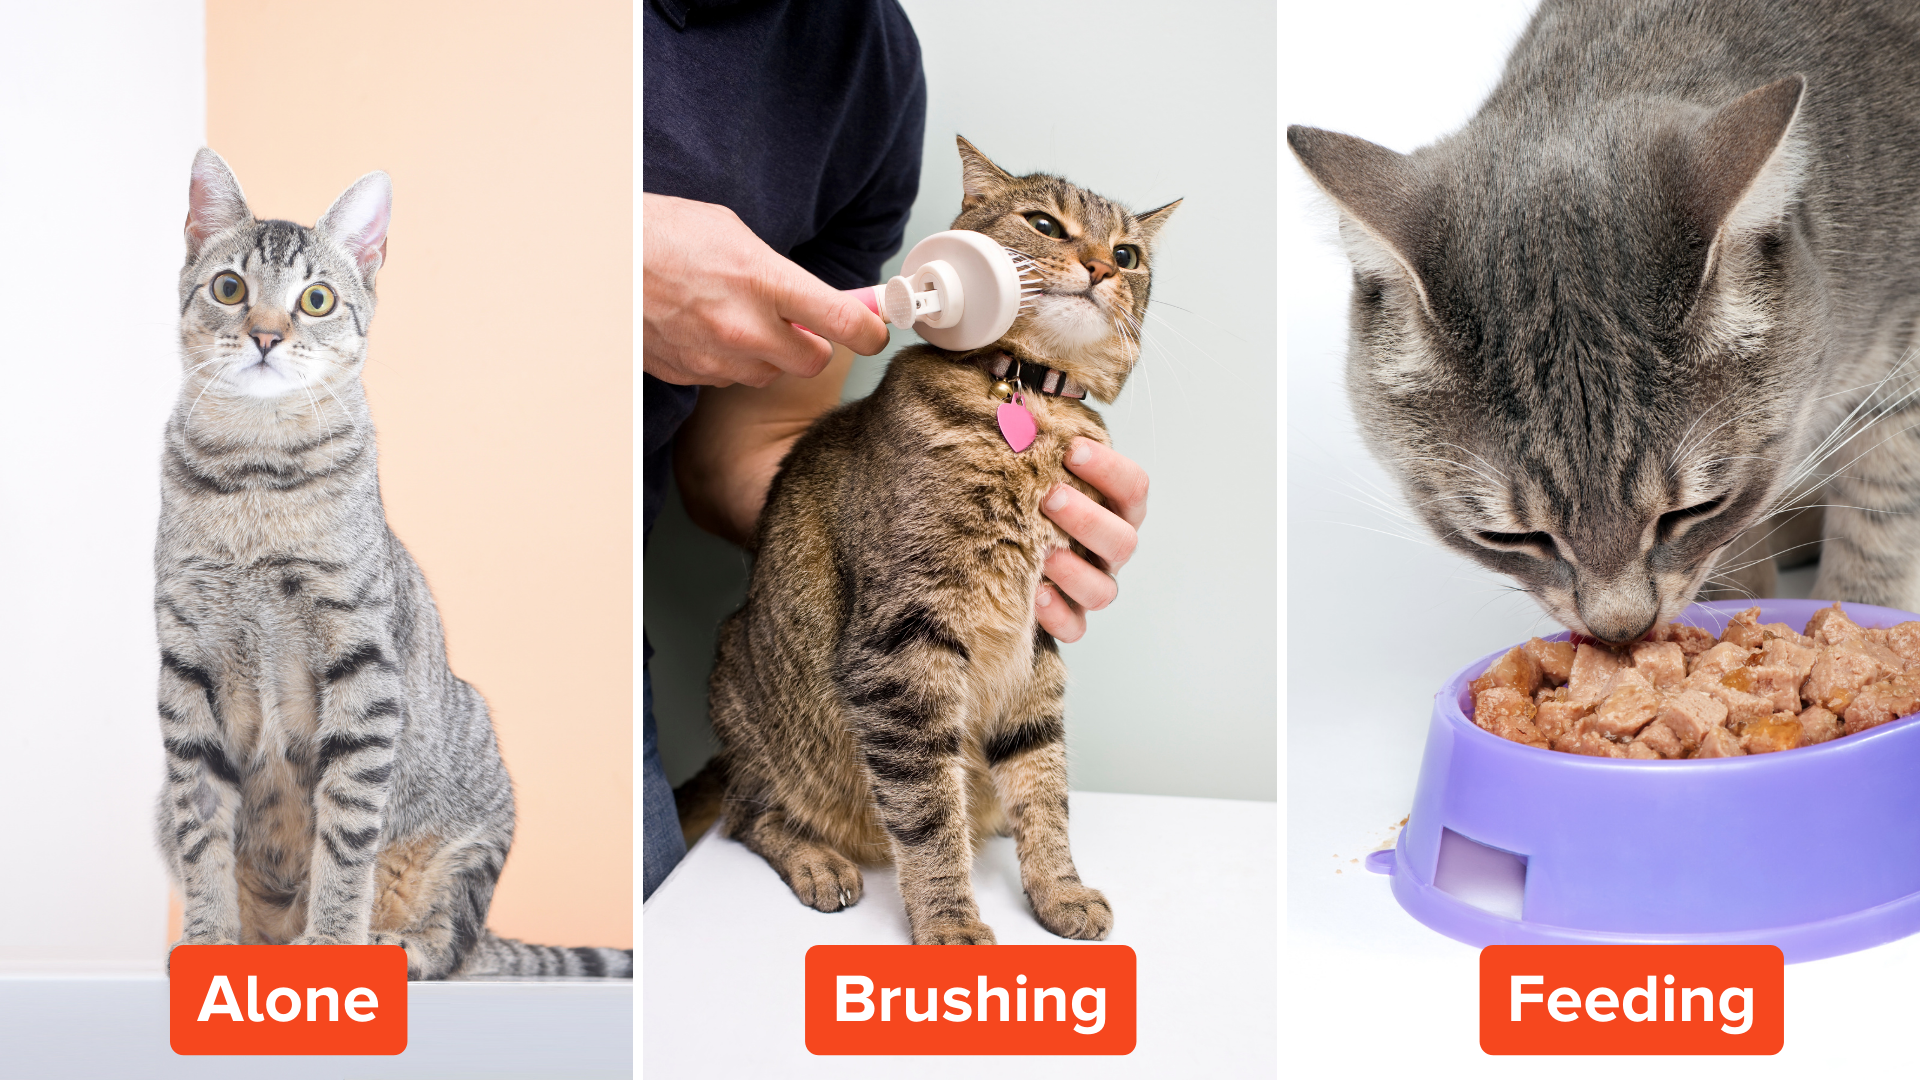 A picture shows a gray tabby cat, alone, with wide eyes on the left. In the center, the cat is being brushed by a person. On the right, the cat is eating food from a purple bowl.